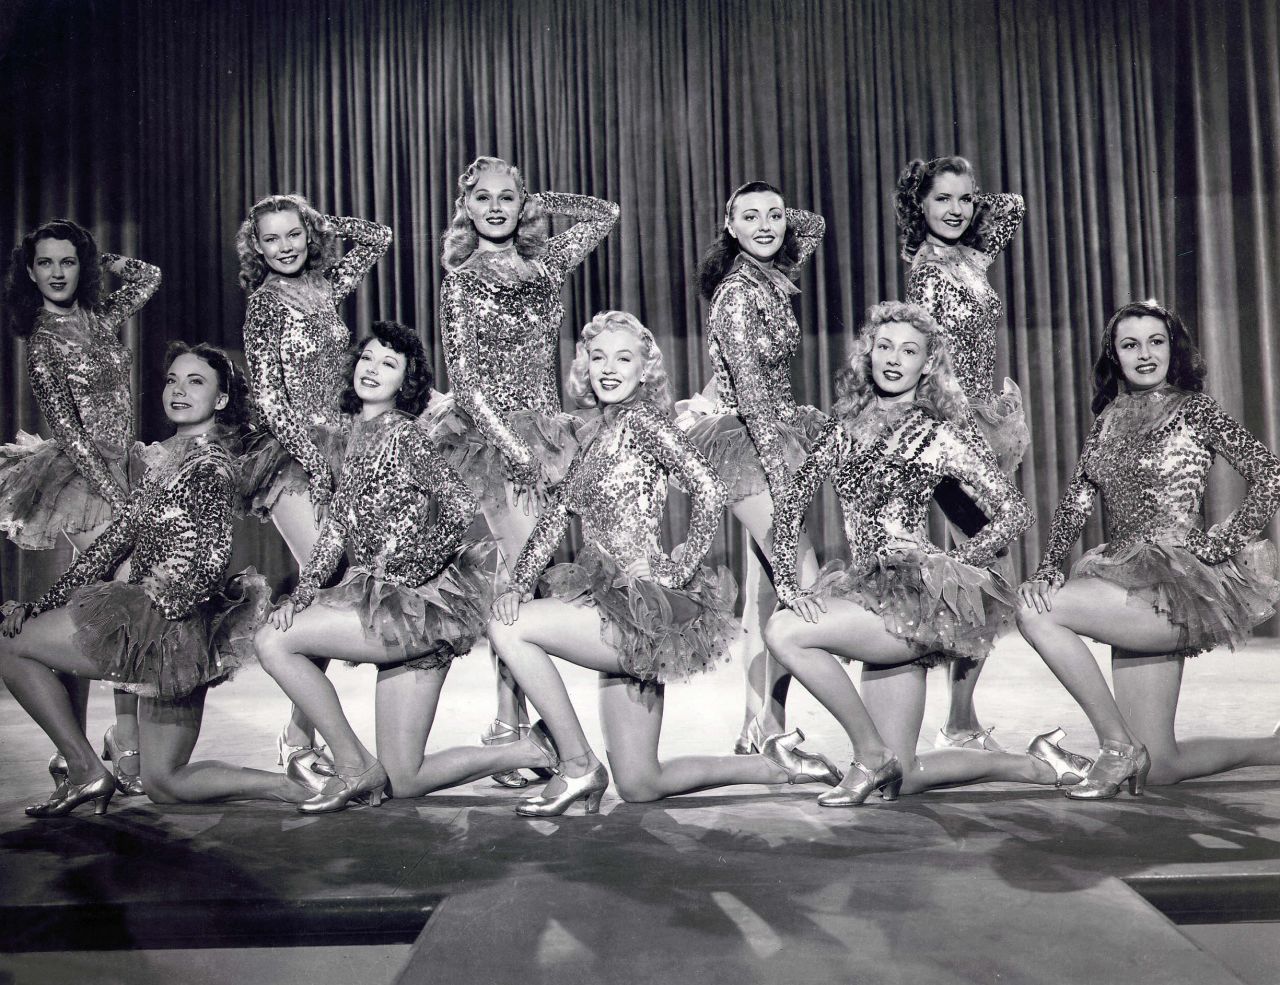 Within a month of signing with Columbia Pictures, 21-year-old Monroe landed her first starring role as a burlesque dancer in a low-budget musical. In the "Ladies of the Chorus," she played a chorus girl named Peggy Martin, who was courted by a lovestruck fan.